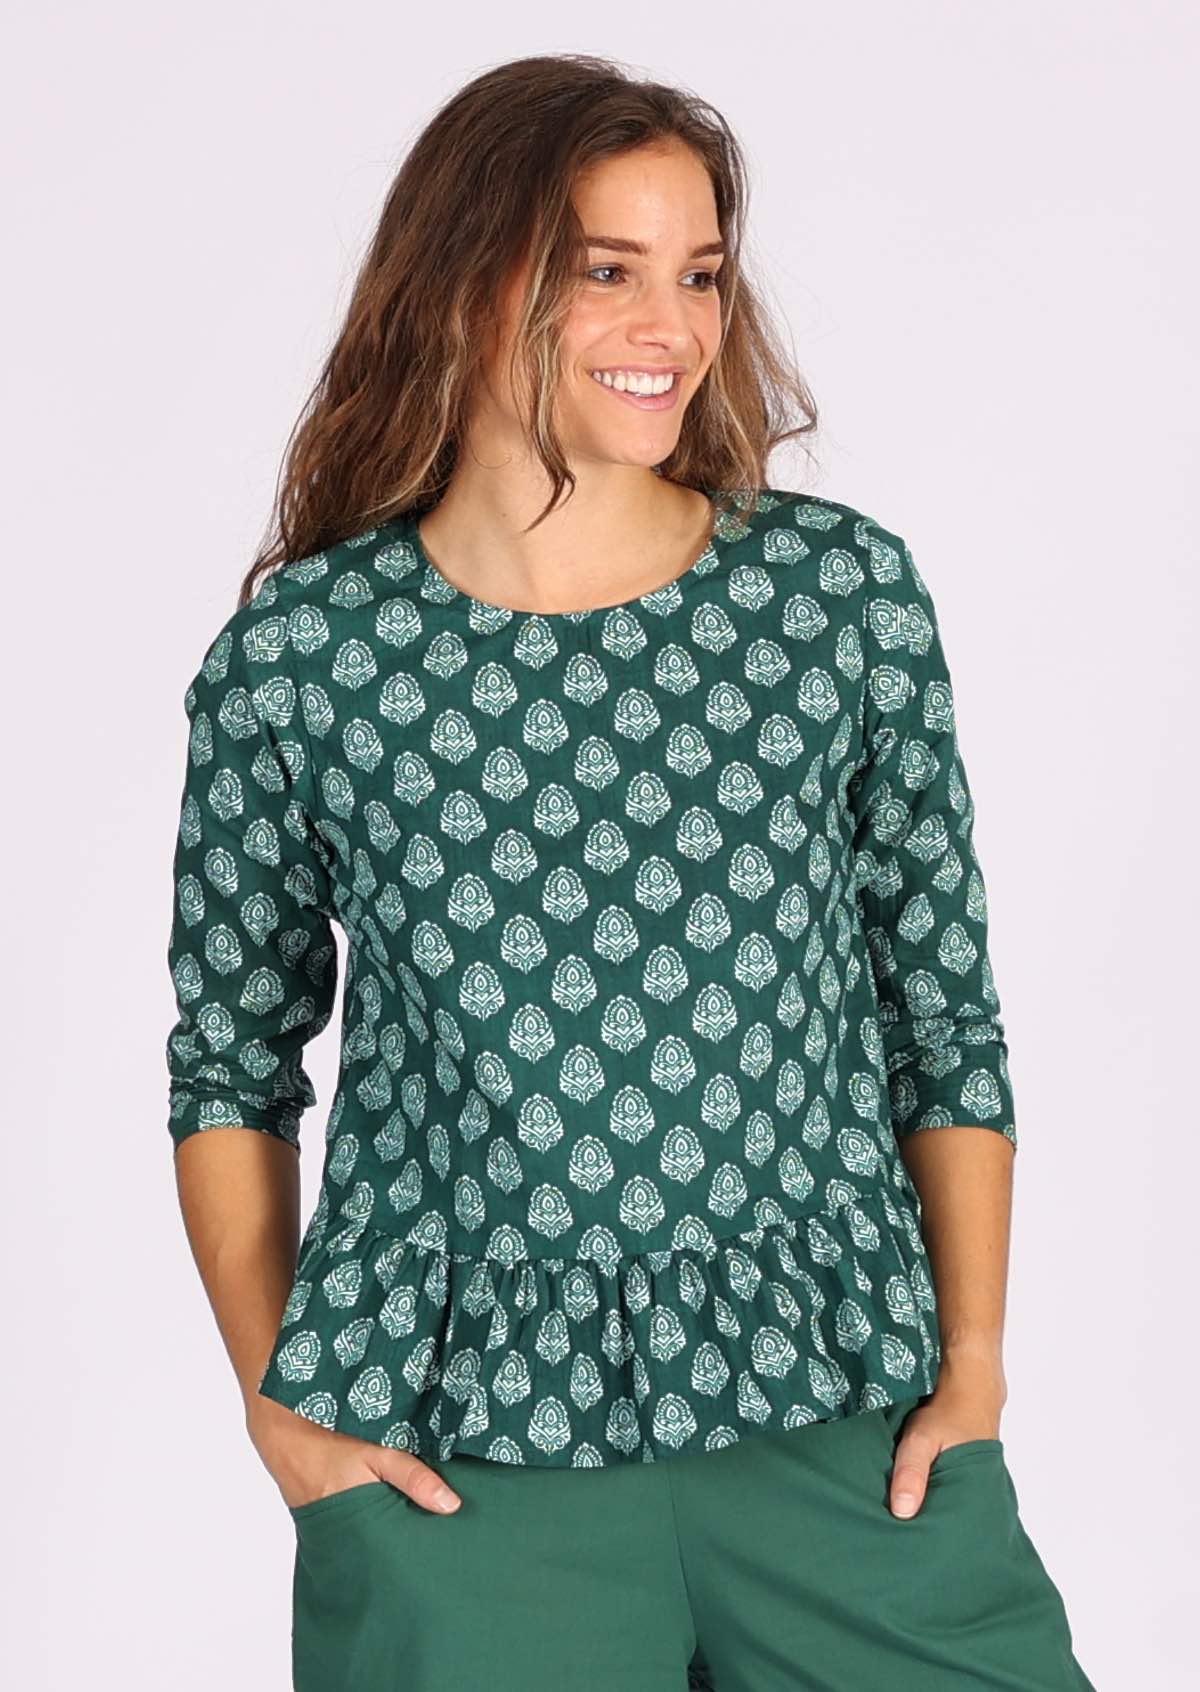 100% cotton top with 3/4 sleeves and peplum frill